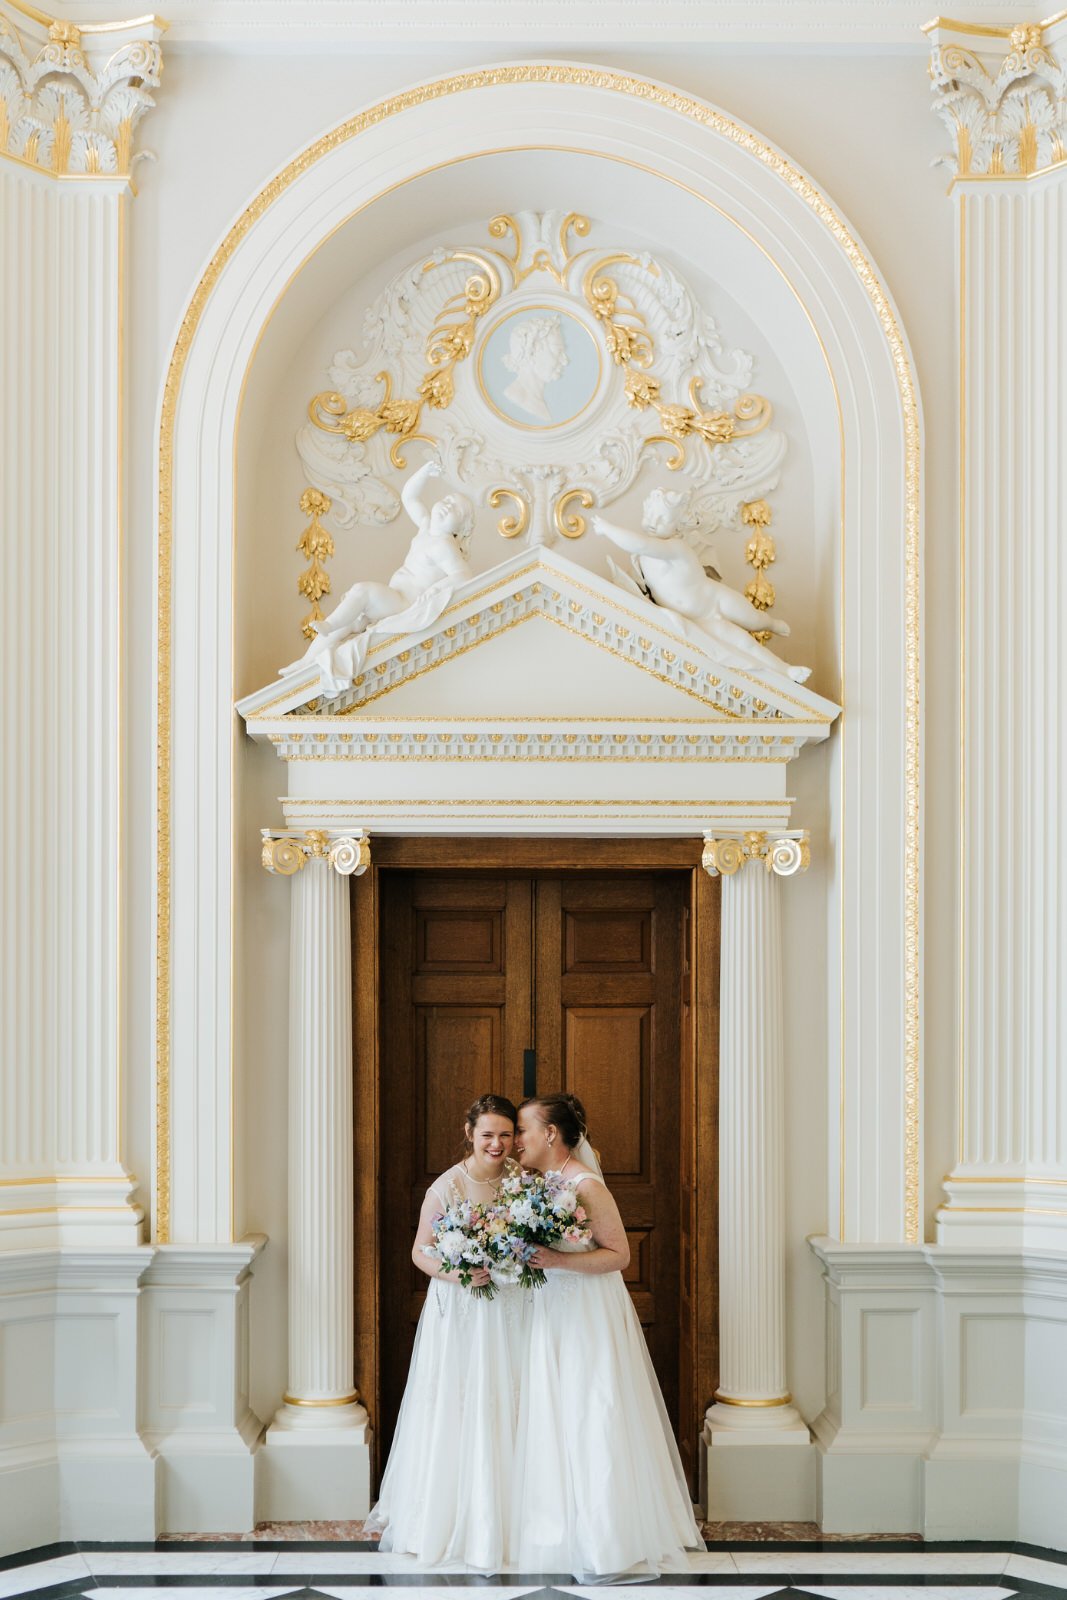 Two brides pose for photograph in dresses and floral bouquets at Orleans House Gallery wedding